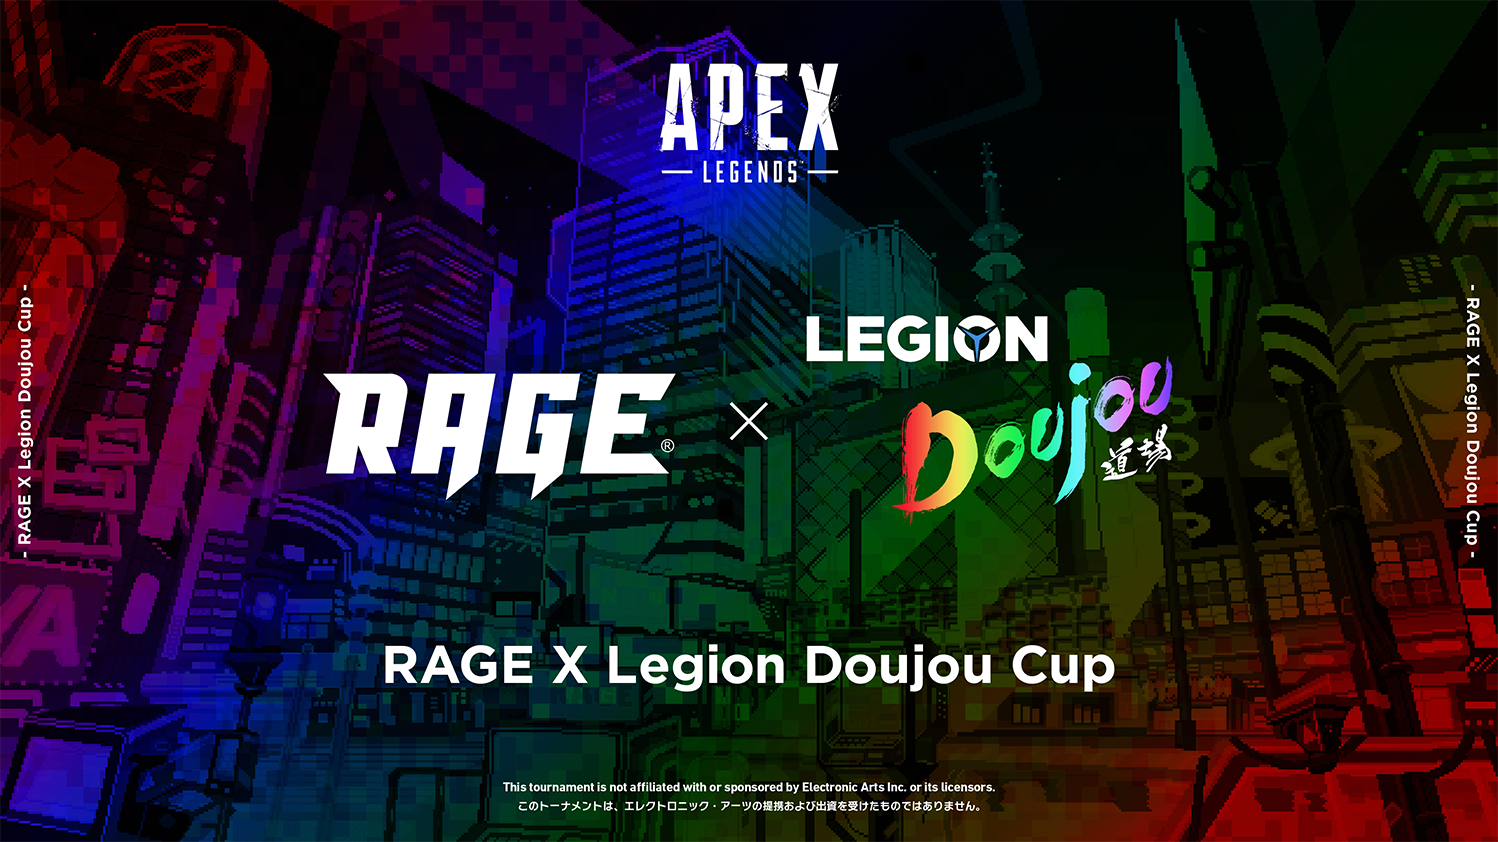 APEX LEGENDS RAGE × LEGION DOUJOU 道場 RAGE × Legion Doujou Cup This tournament is not affiliated with or sponsored by Electronic Arts Inc. or its licensors. このトーナメントは、エレクトロニック・アーツの提携および出資を受けたものではありません。